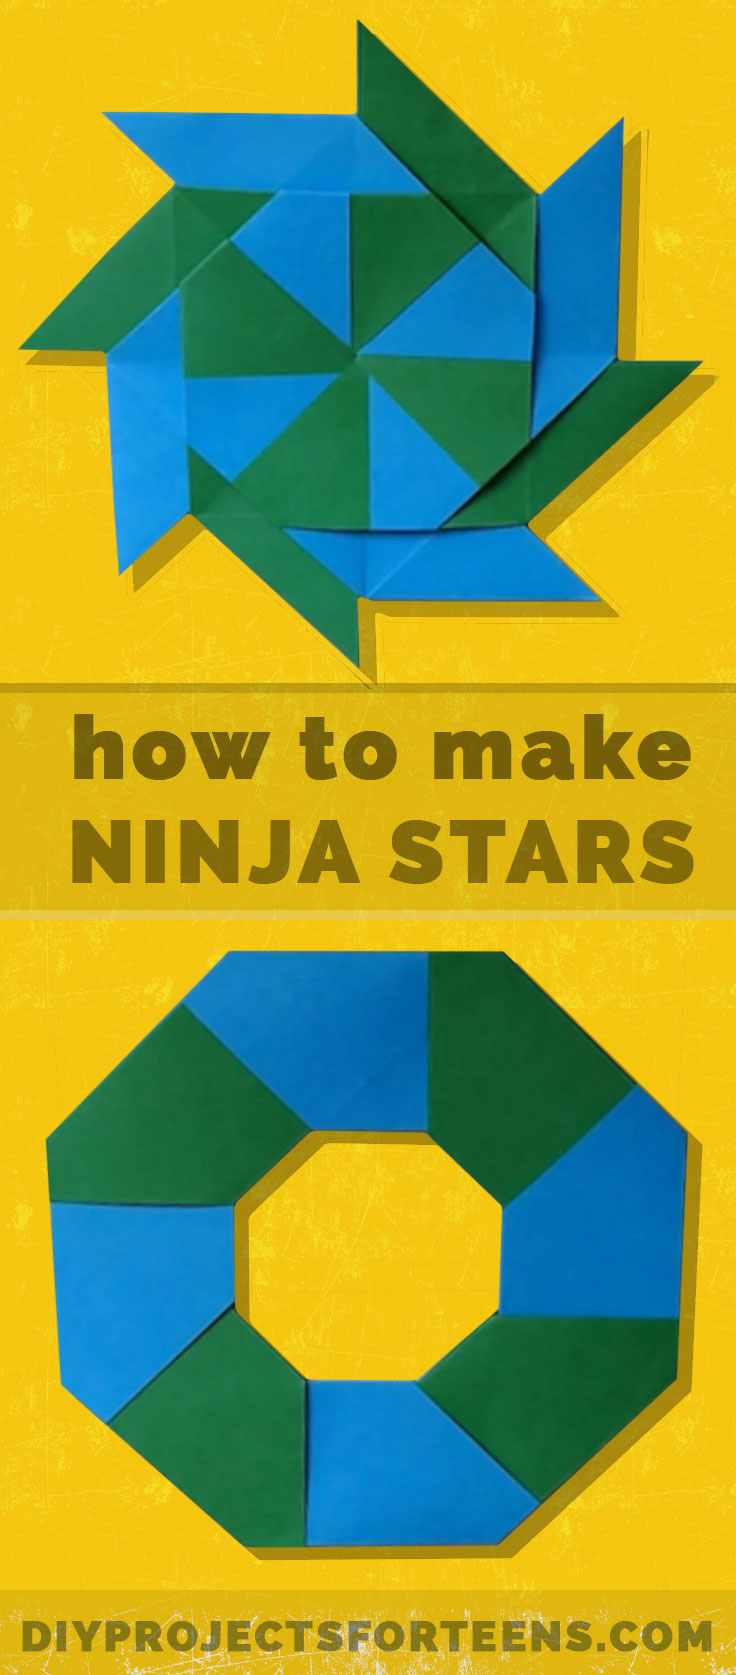 Crafts For Boys - How To Make Ninja Stars. Cool Paper Crafts for Kids and Teens. Boys and Girls love these Cheap but Cool DIY Projects You Can Make At Home